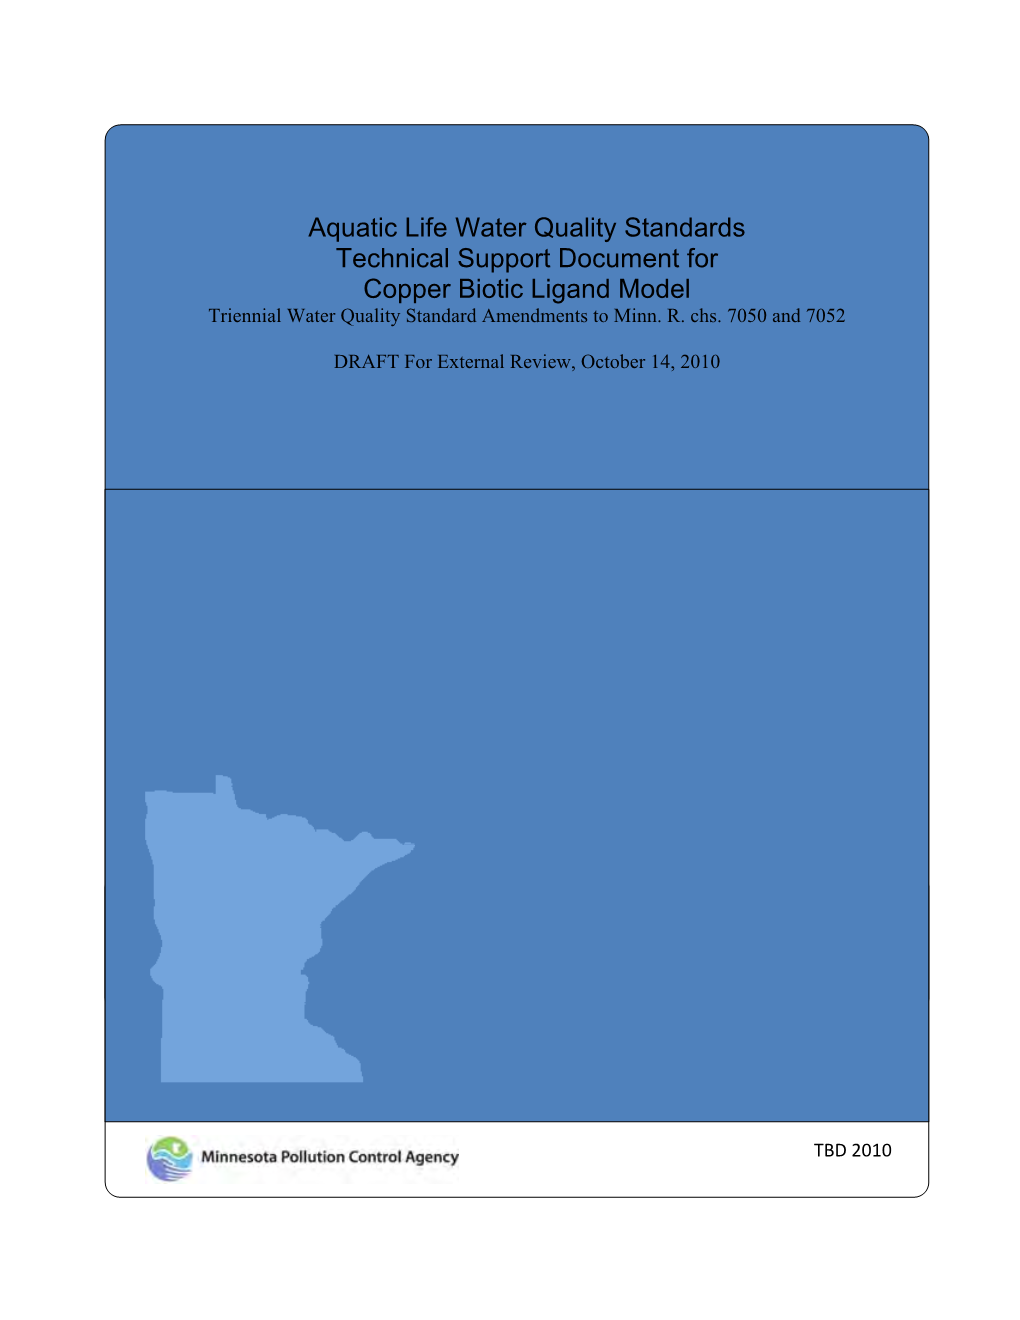 Aquatic Life Water Quality Standards Technical Support Document for Copper Biotic Ligand Model Triennial Water Quality Standard Amendments to Minn